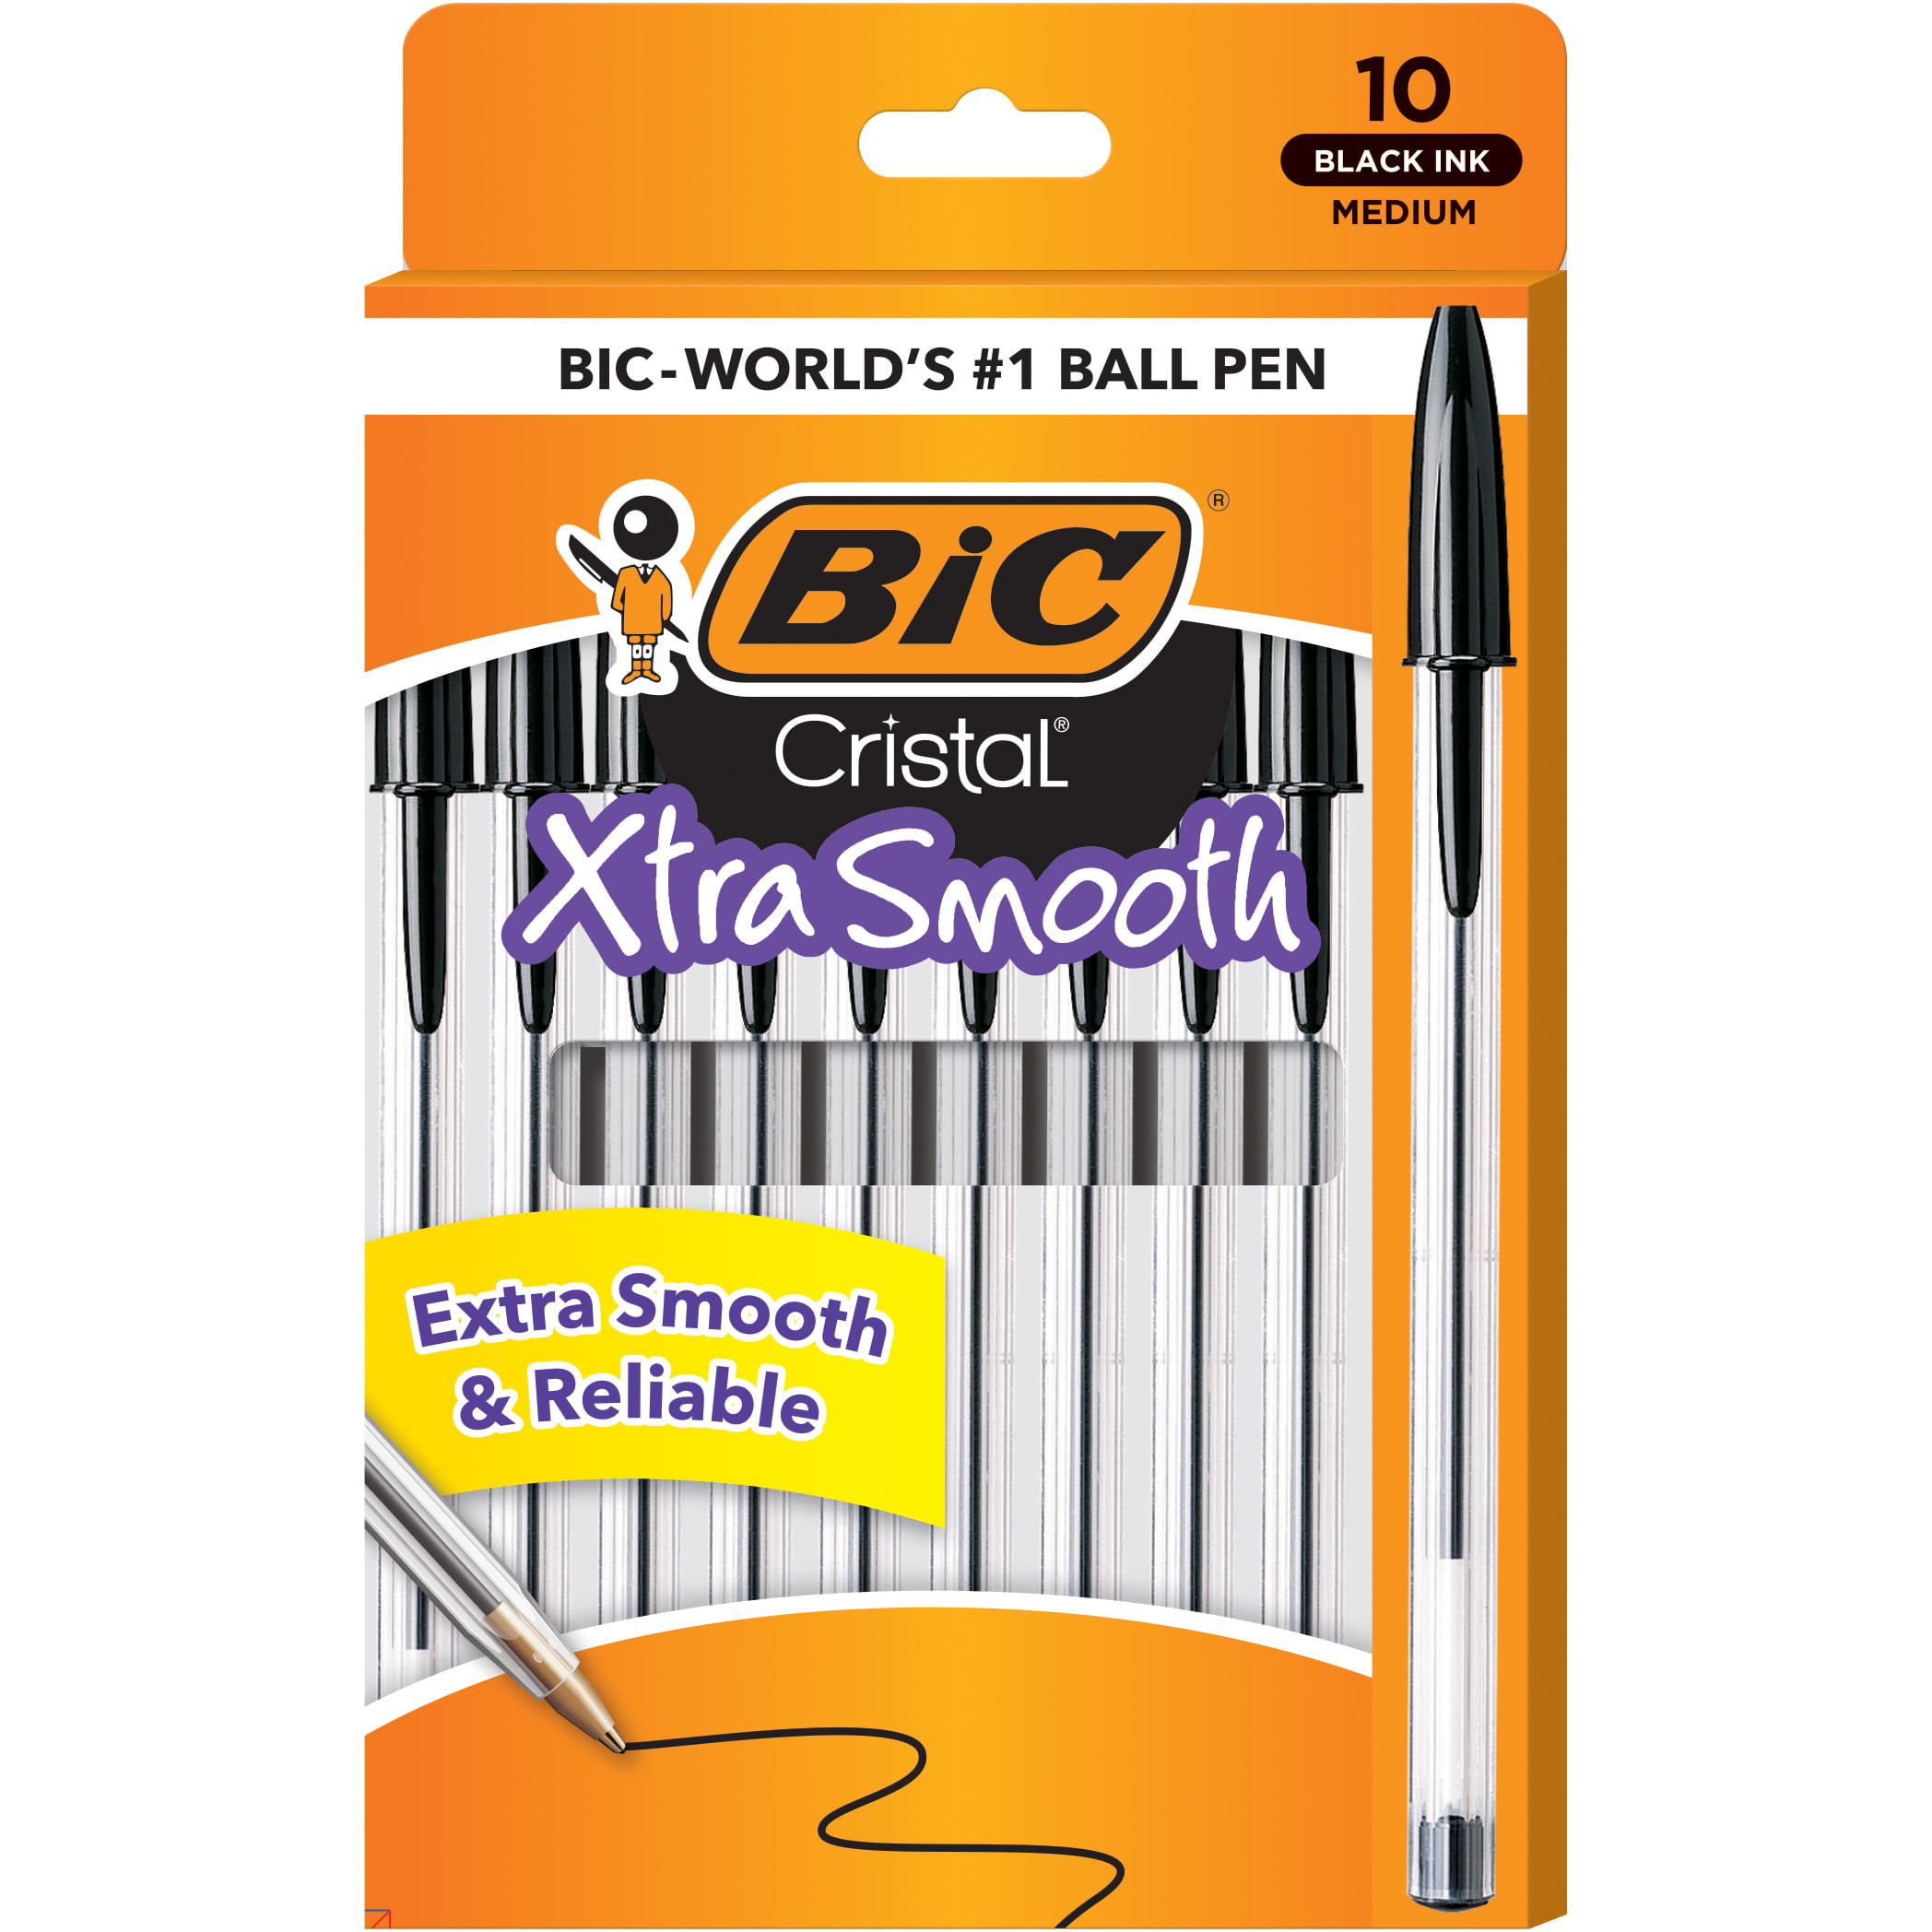 BIC Cristal Xtra Smooth Ballpoint Pens, 1.00 mm, Black Ink, Pack of 10 - image 1 of 7